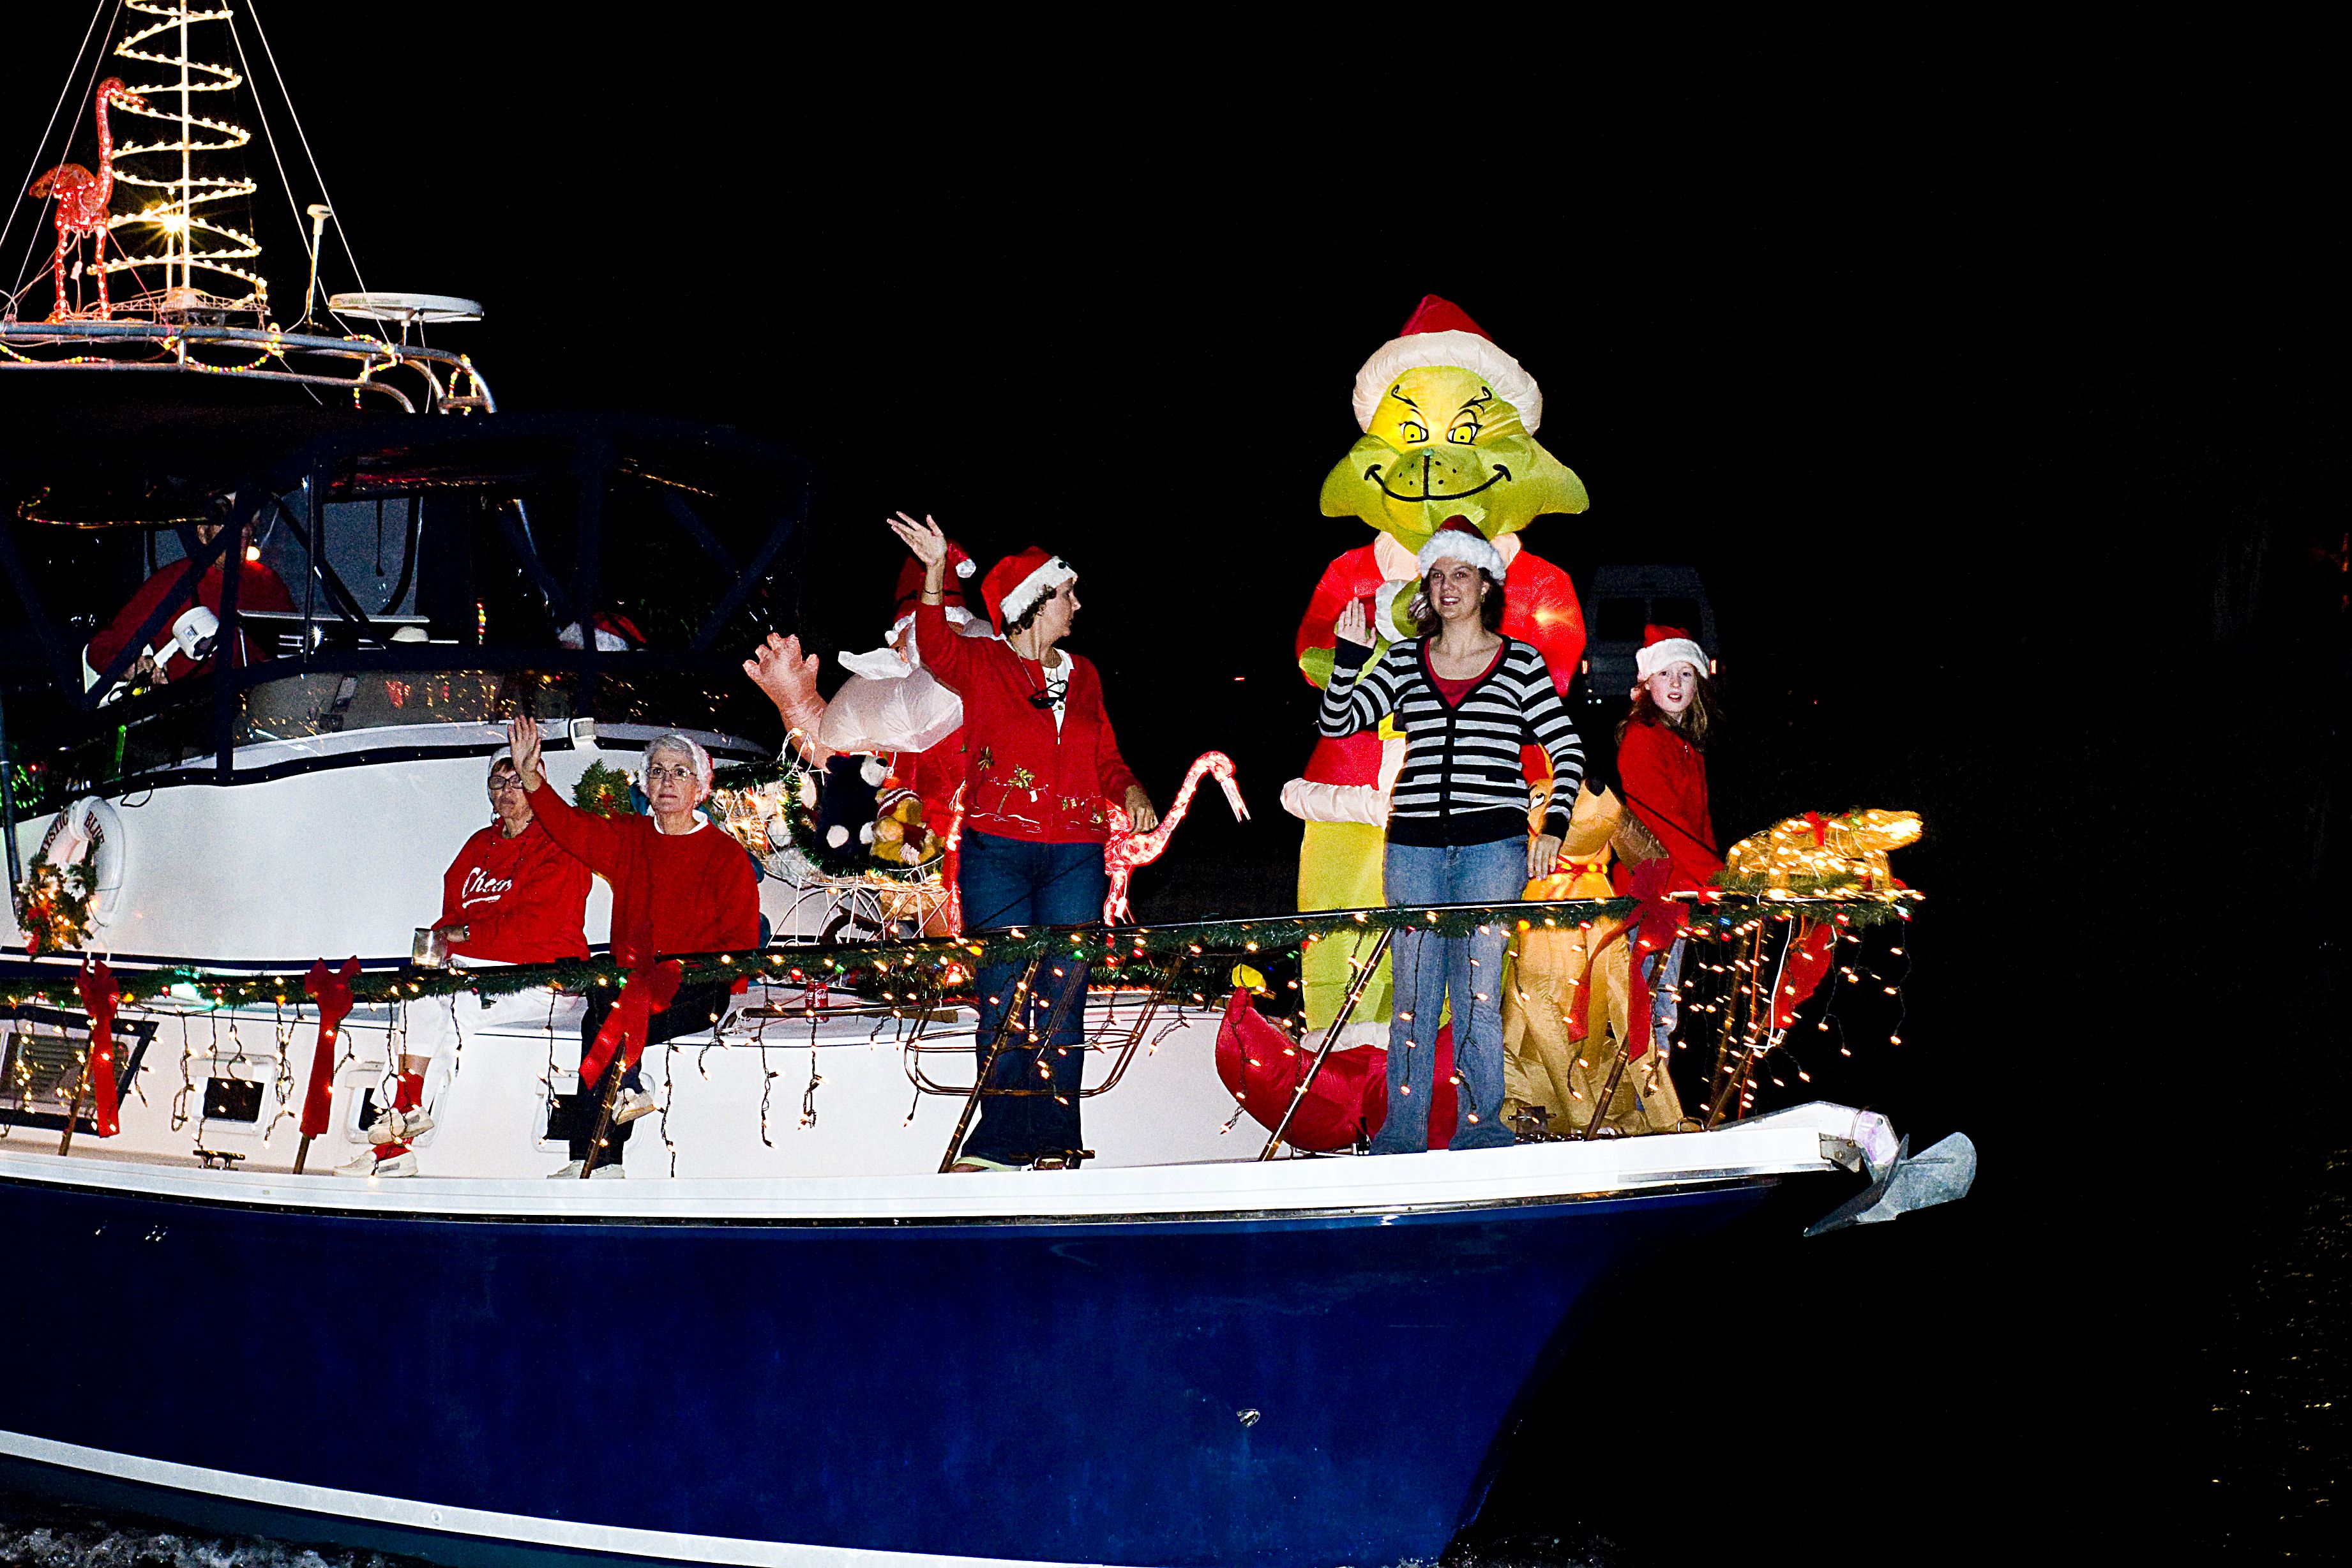 Decorating Tips Workshop The Saturday Night Before Christmas Eve Boat Parade The Biggest Annual Event In The Isles